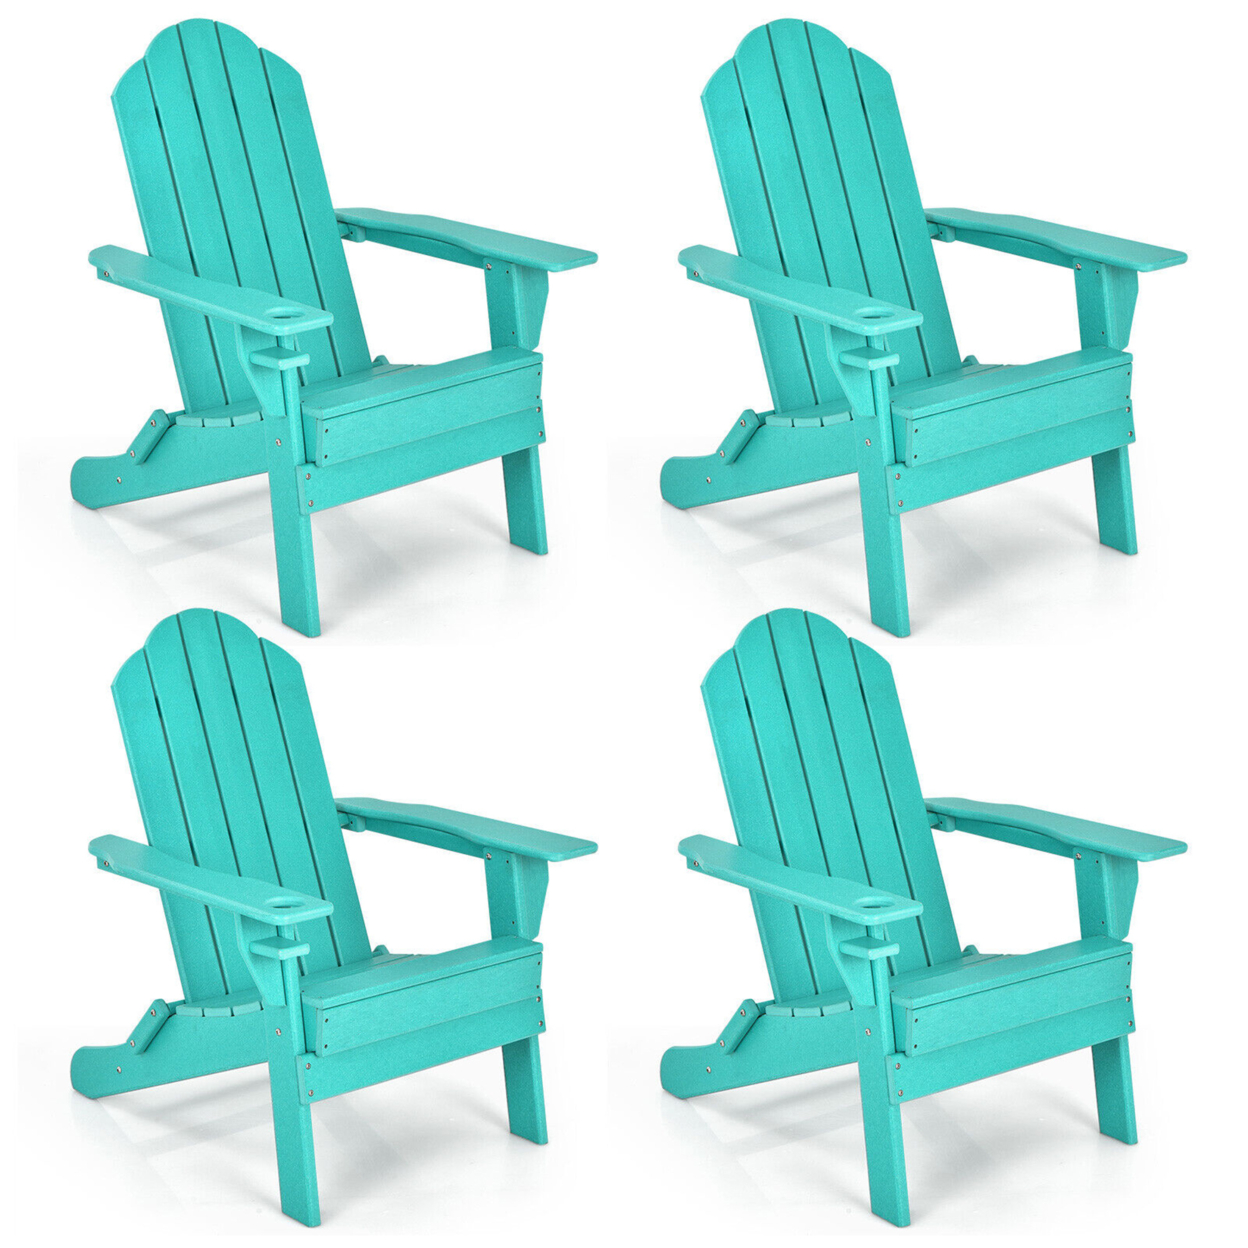 4PCS Patio Folding Adirondack Chair Weather Resistant Cup Holder Yard - Turquoise